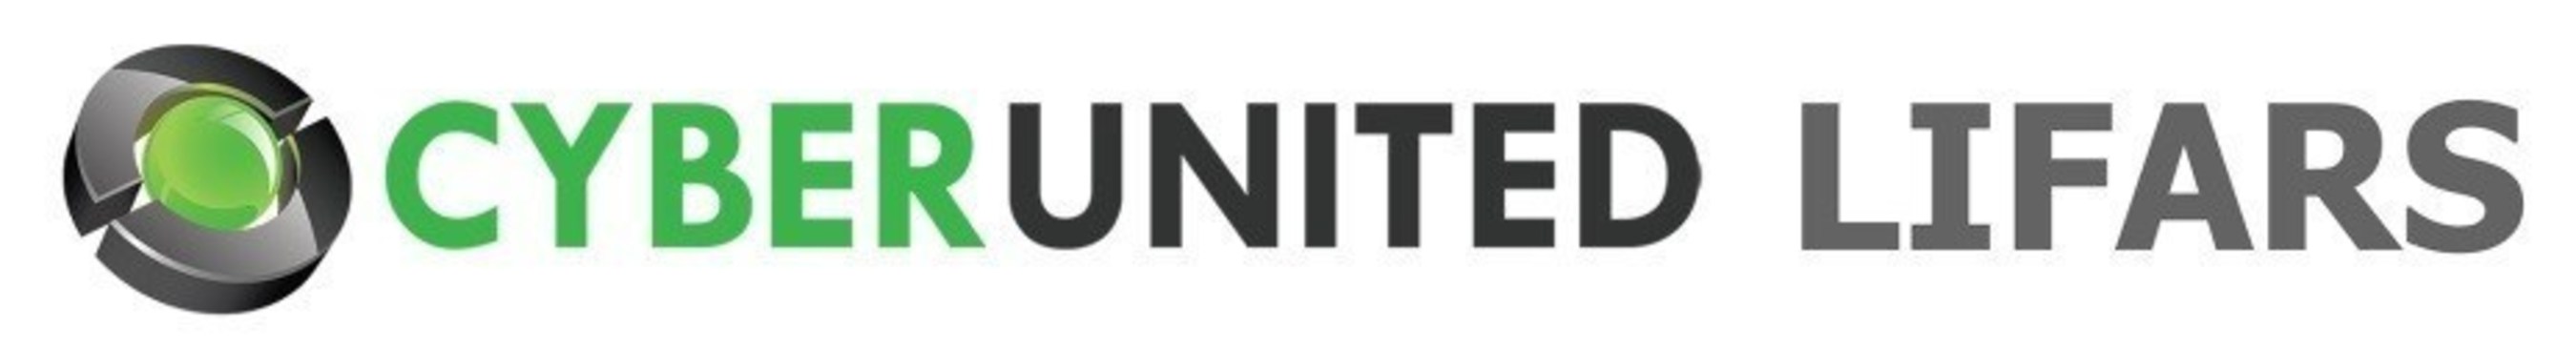 CyberUnited and LIFARS Joint Venture